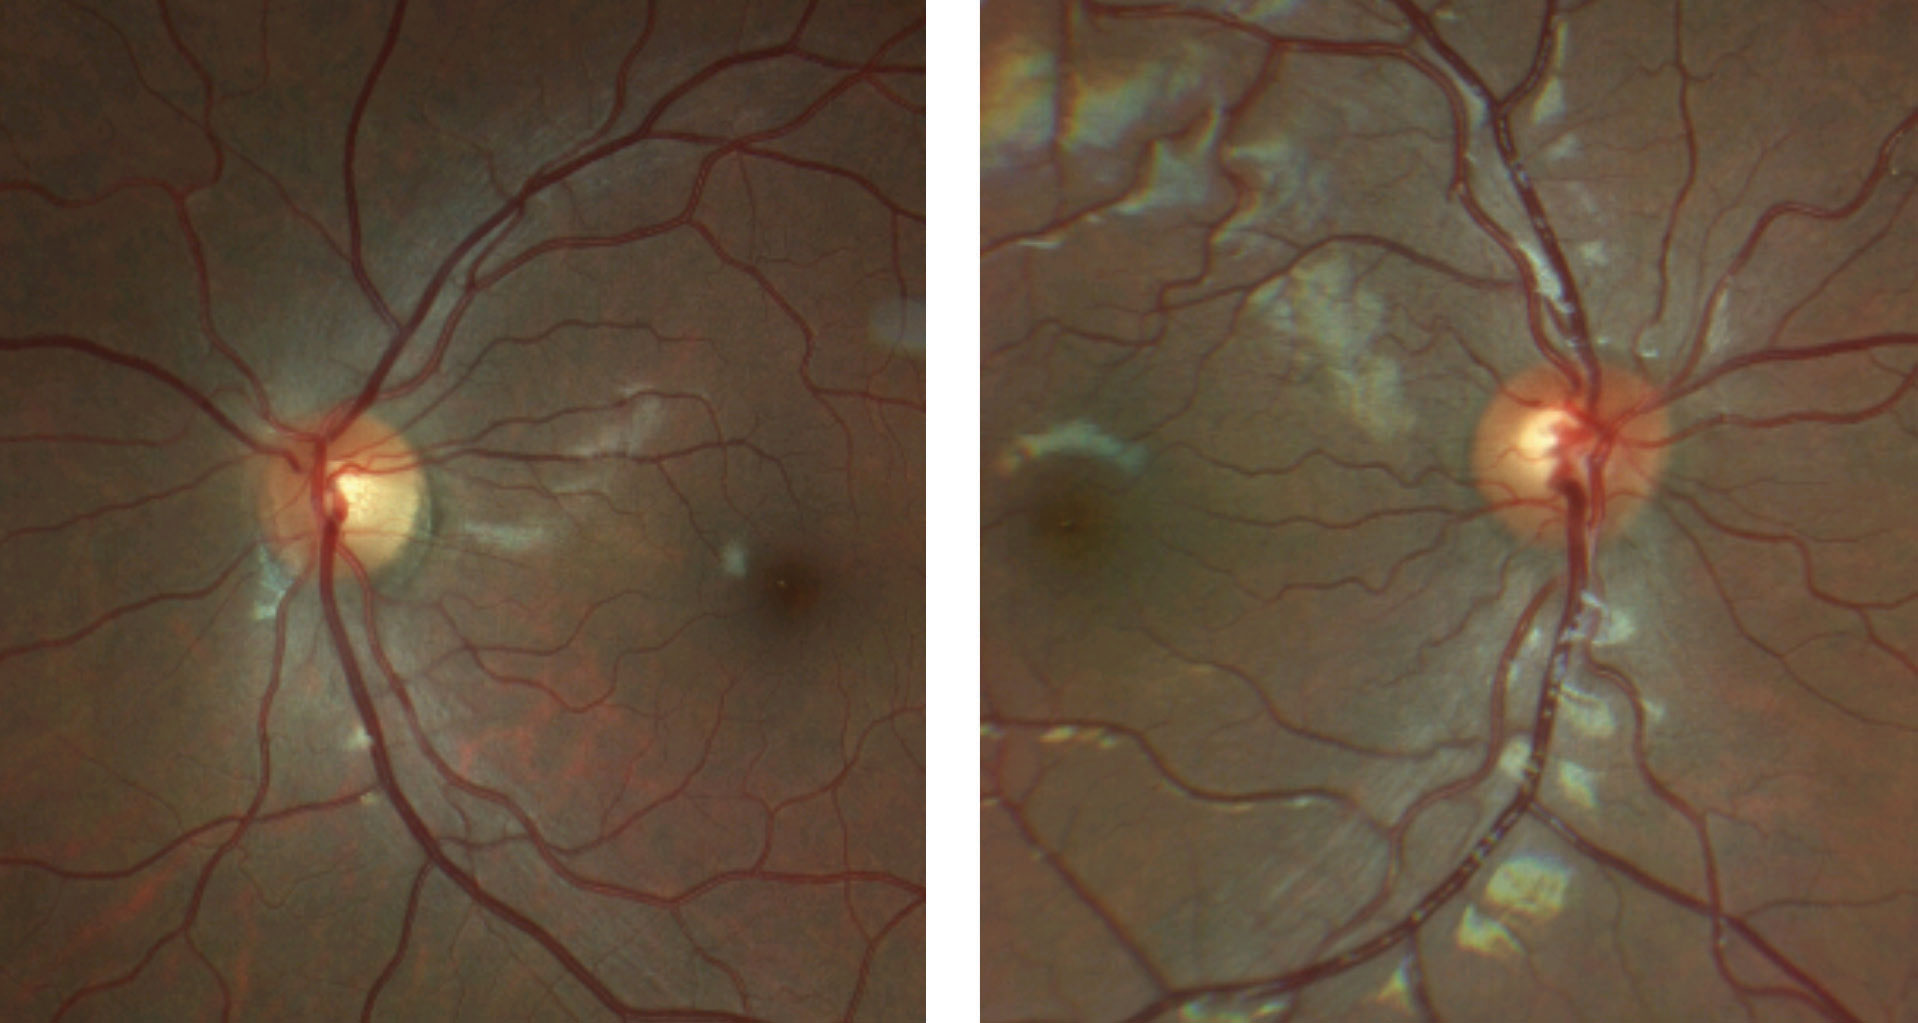 This patient’s fundus photo suggests a pale temporal neuroretinal rim in the left eye.